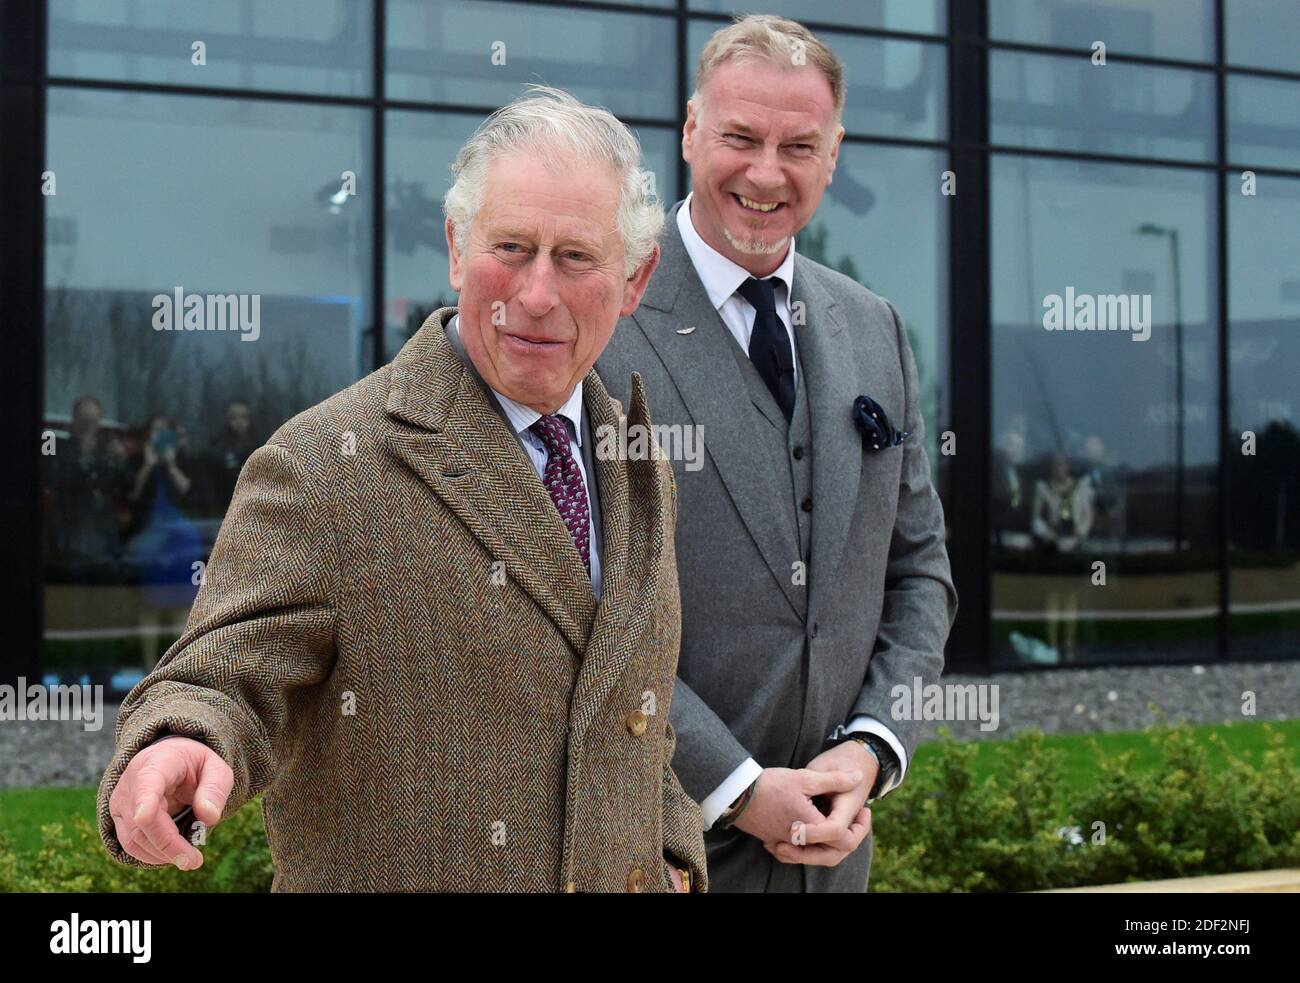 The Prince of Wales and Aston Martin Lagonda's Marek Reichman, EVP and Chief Creative Officer speak at the new Aston Martin Lagonda factory in Barry, Wales, UK on February 21, 2020. Photo by Rebecca Naden/PA Photos/ABACAPRESS.COM Stock Photo